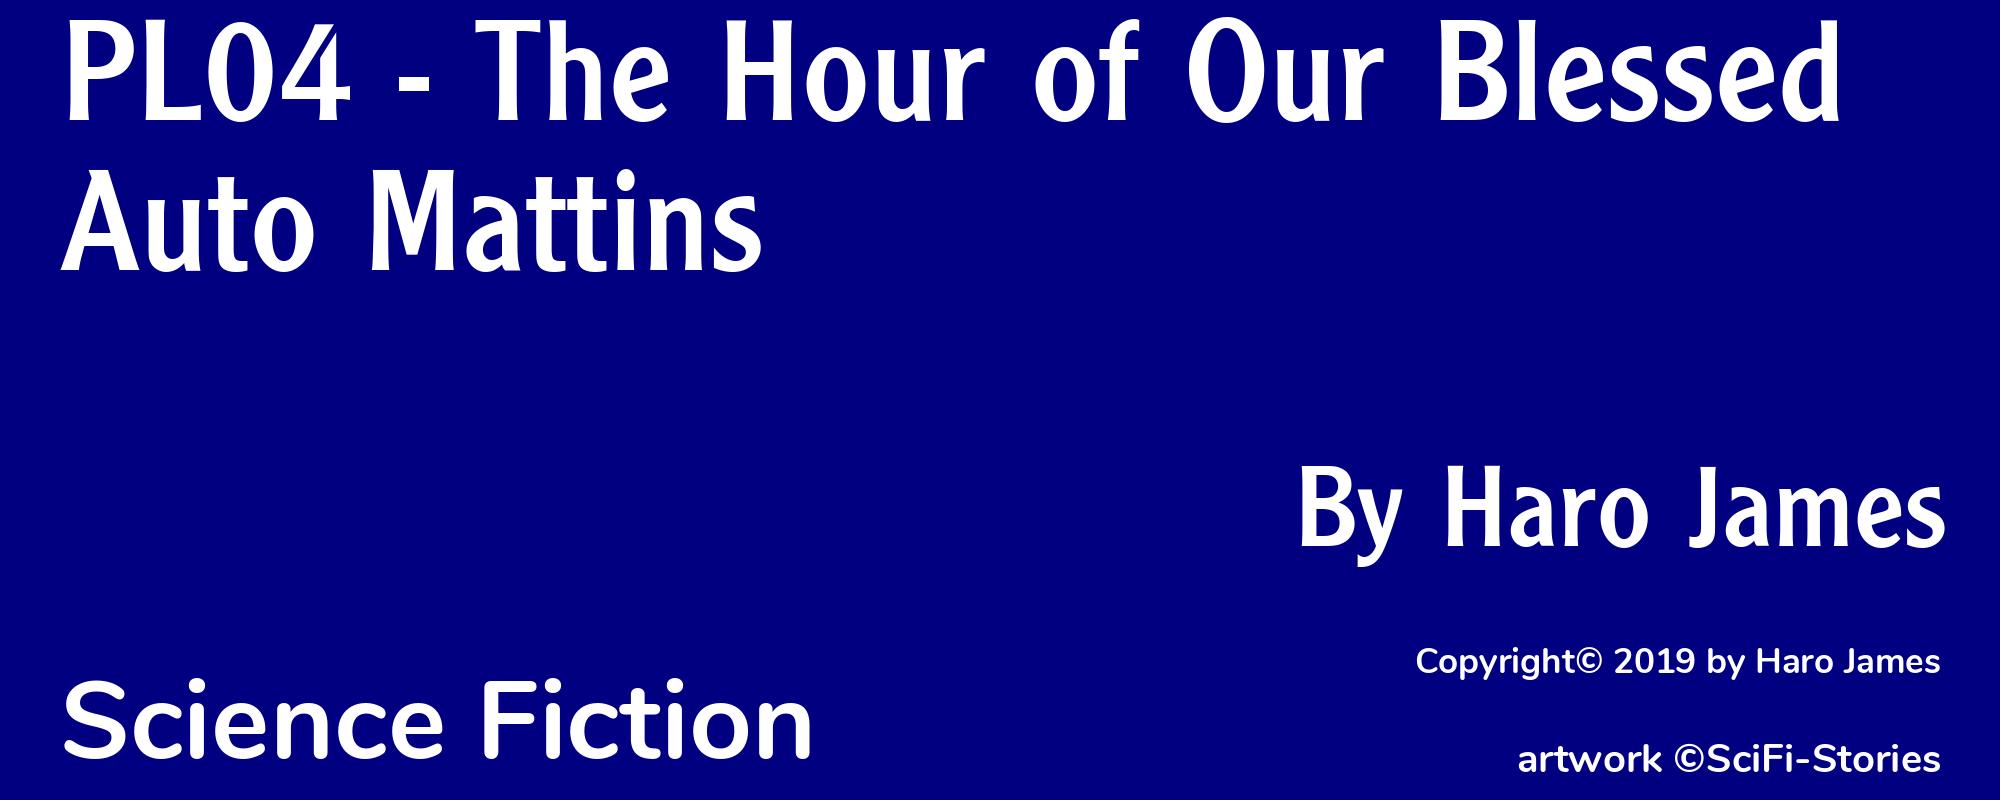 PL04 - The Hour of Our Blessed Auto Mattins - Cover